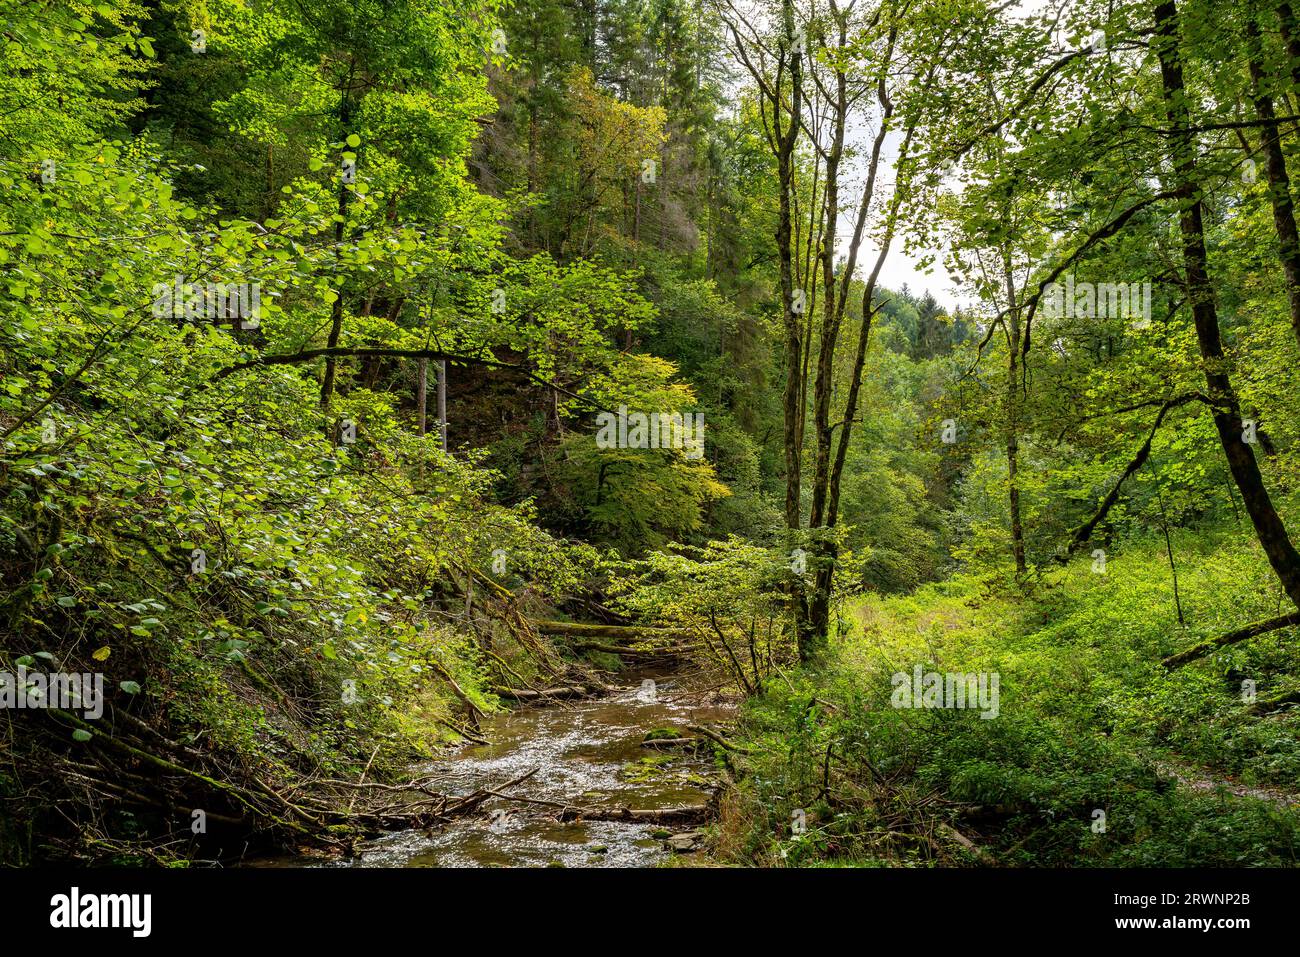 View over Gauchach river in Gauchach gorge in Black Forest, Germany Stock Photo